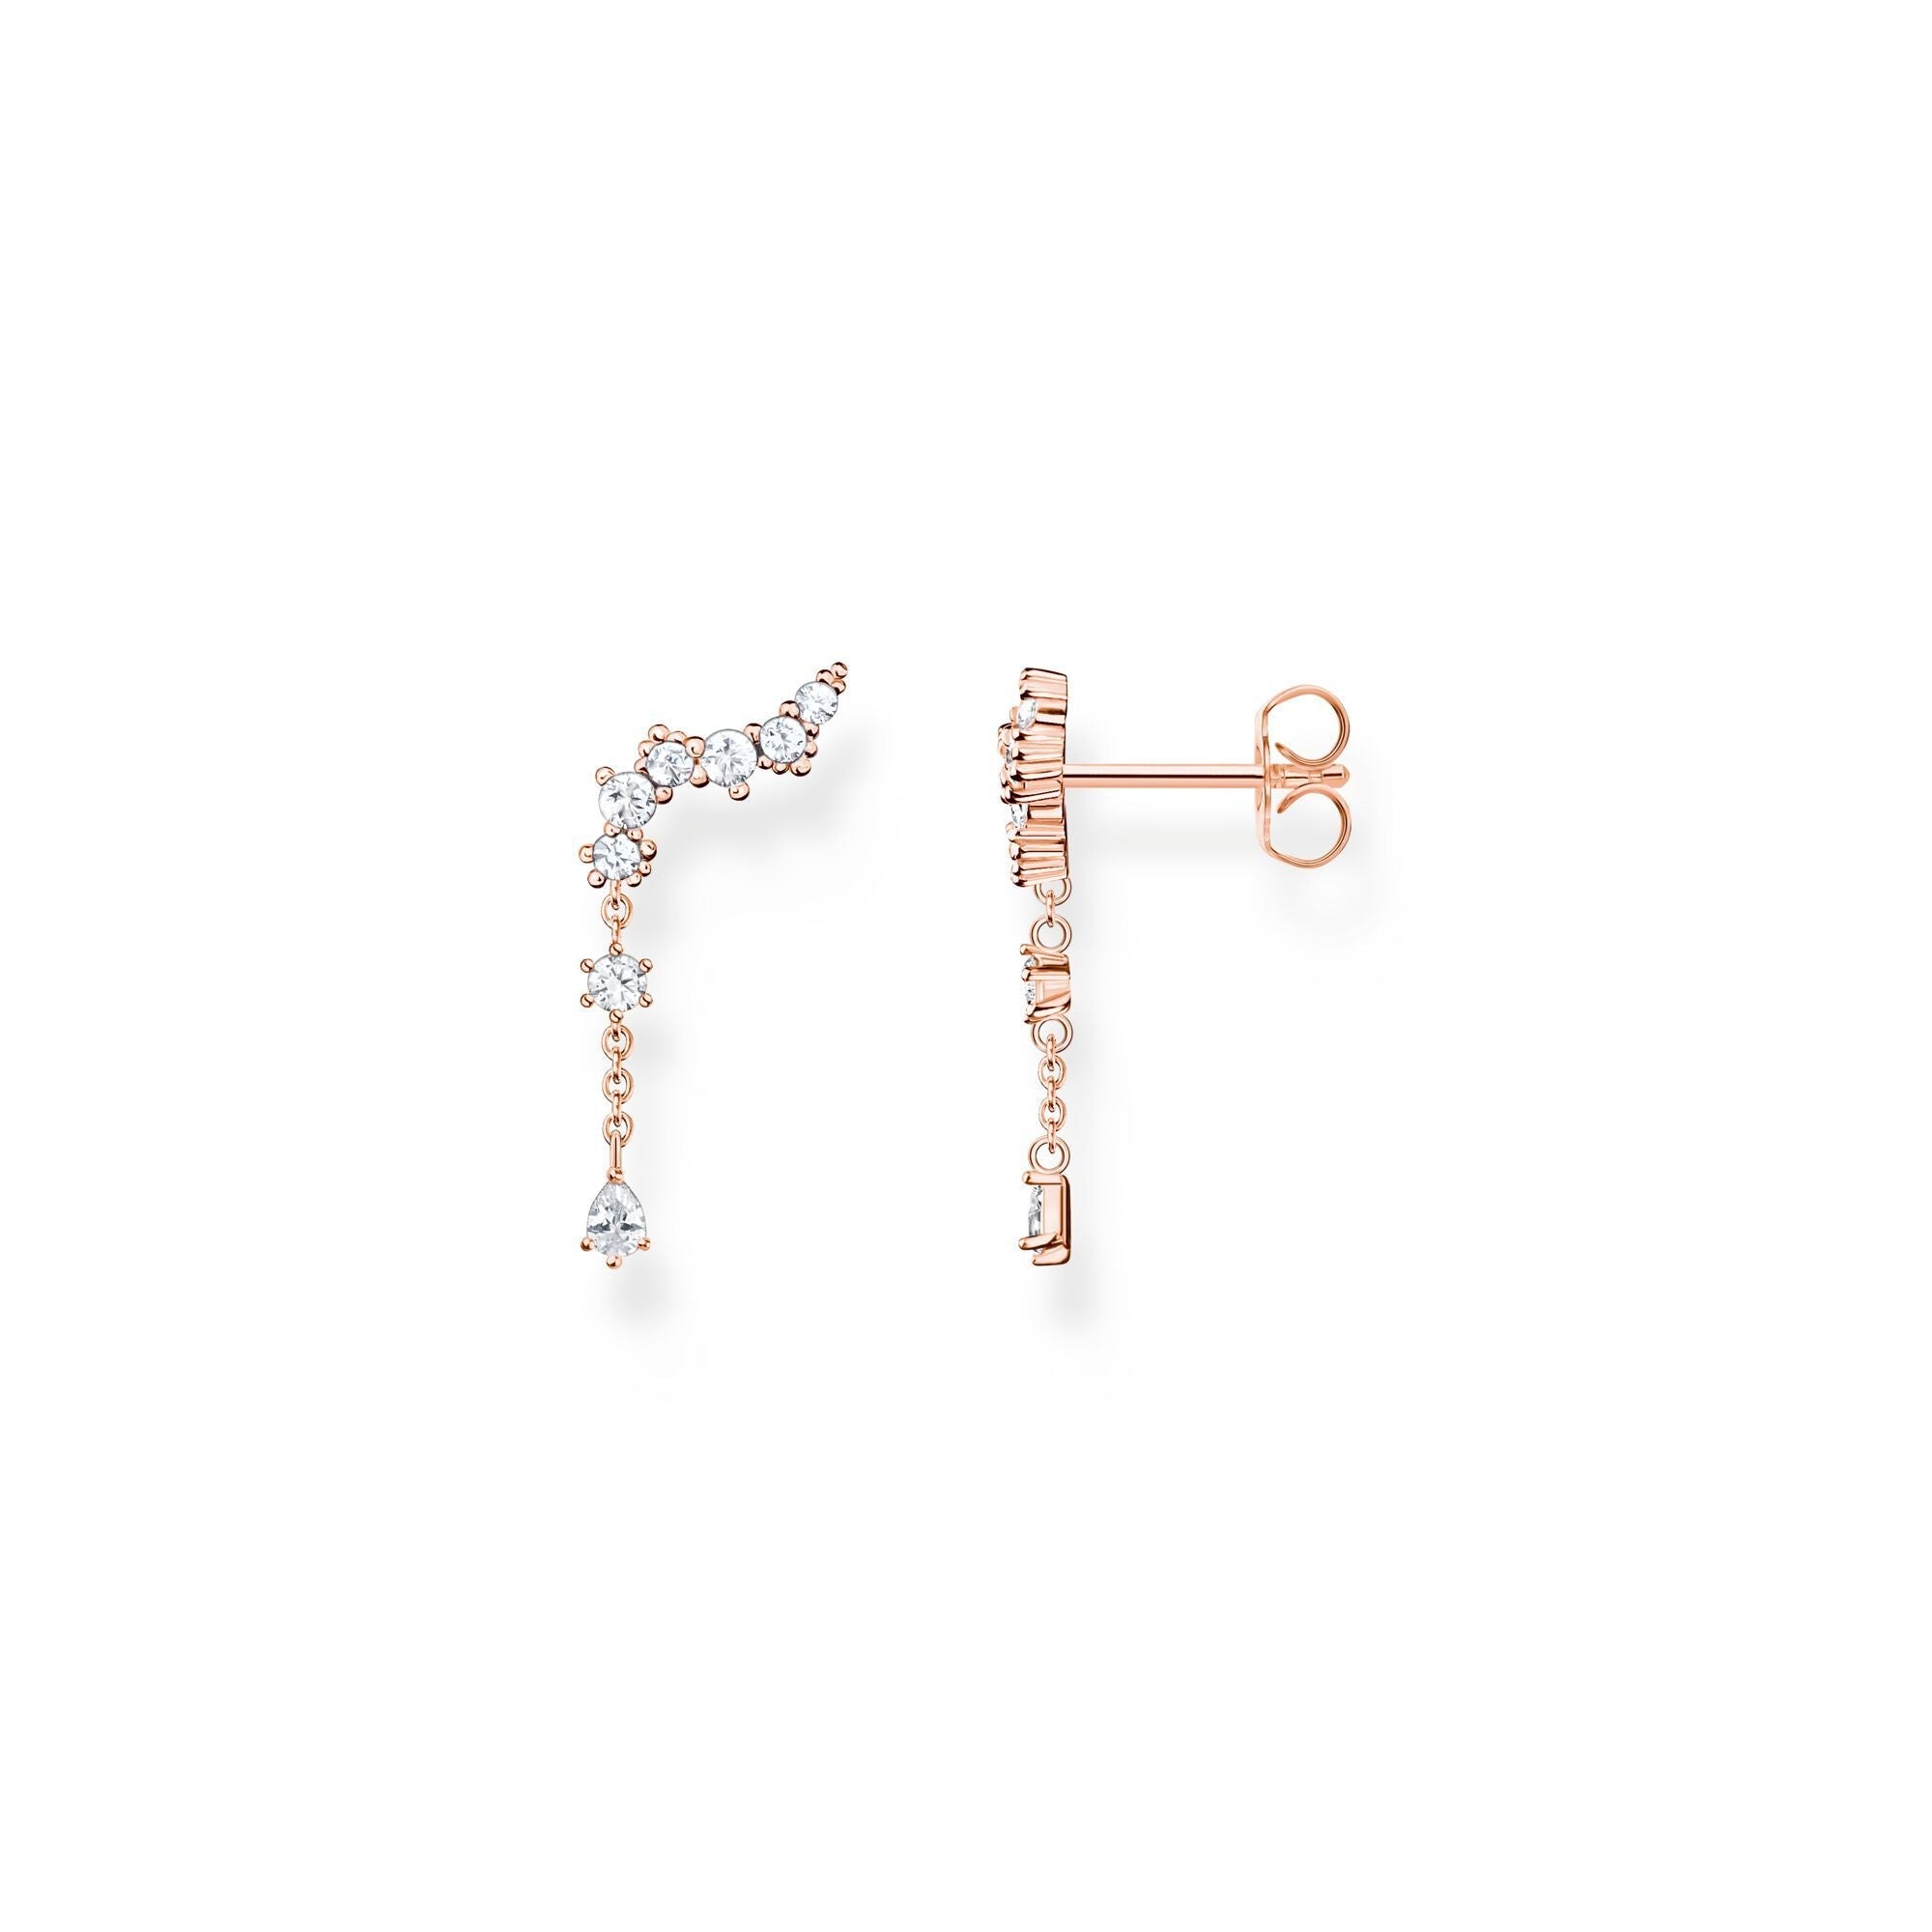 Thomas Sabo Rose Gold Plated Sterling Silver Ice Crystal Ear Climber Earrings